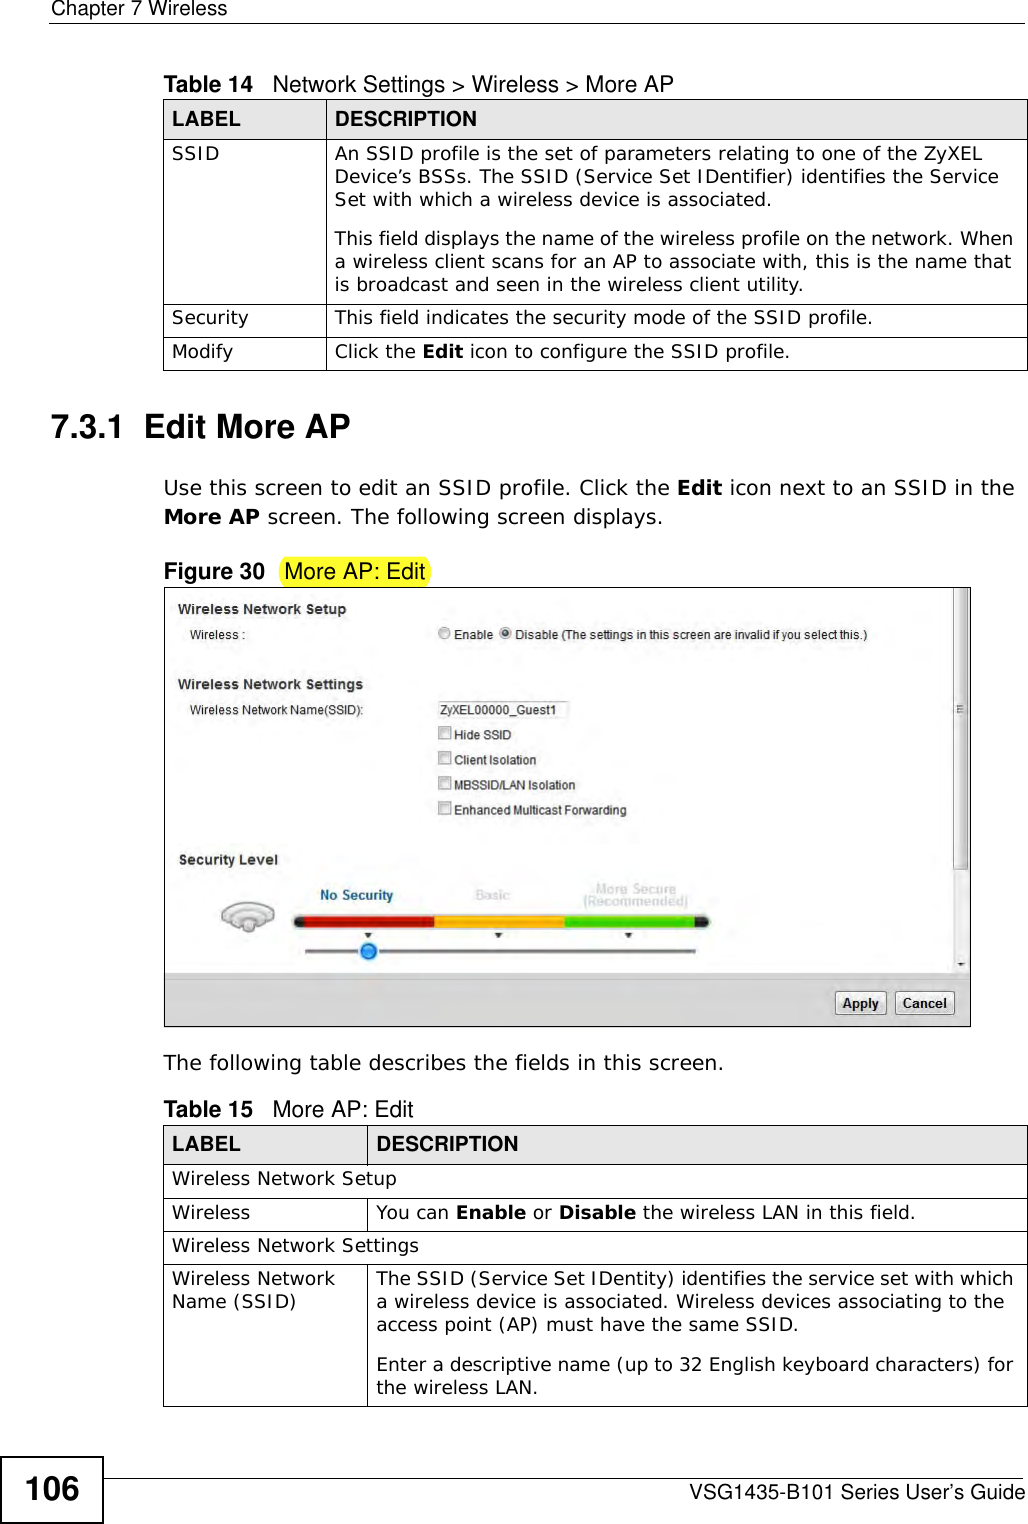 Chapter 7 WirelessVSG1435-B101 Series User’s Guide1067.3.1  Edit More AP Use this screen to edit an SSID profile. Click the Edit icon next to an SSID in the More AP screen. The following screen displays.Figure 30   More AP: EditThe following table describes the fields in this screen.SSID An SSID profile is the set of parameters relating to one of the ZyXEL Device’s BSSs. The SSID (Service Set IDentifier) identifies the Service Set with which a wireless device is associated. This field displays the name of the wireless profile on the network. When a wireless client scans for an AP to associate with, this is the name that is broadcast and seen in the wireless client utility.Security This field indicates the security mode of the SSID profile.Modify Click the Edit icon to configure the SSID profile.Table 14   Network Settings &gt; Wireless &gt; More APLABEL DESCRIPTIONTable 15   More AP: EditLABEL DESCRIPTIONWireless Network SetupWireless You can Enable or Disable the wireless LAN in this field.Wireless Network SettingsWireless Network Name (SSID) The SSID (Service Set IDentity) identifies the service set with which a wireless device is associated. Wireless devices associating to the access point (AP) must have the same SSID. Enter a descriptive name (up to 32 English keyboard characters) for the wireless LAN. 